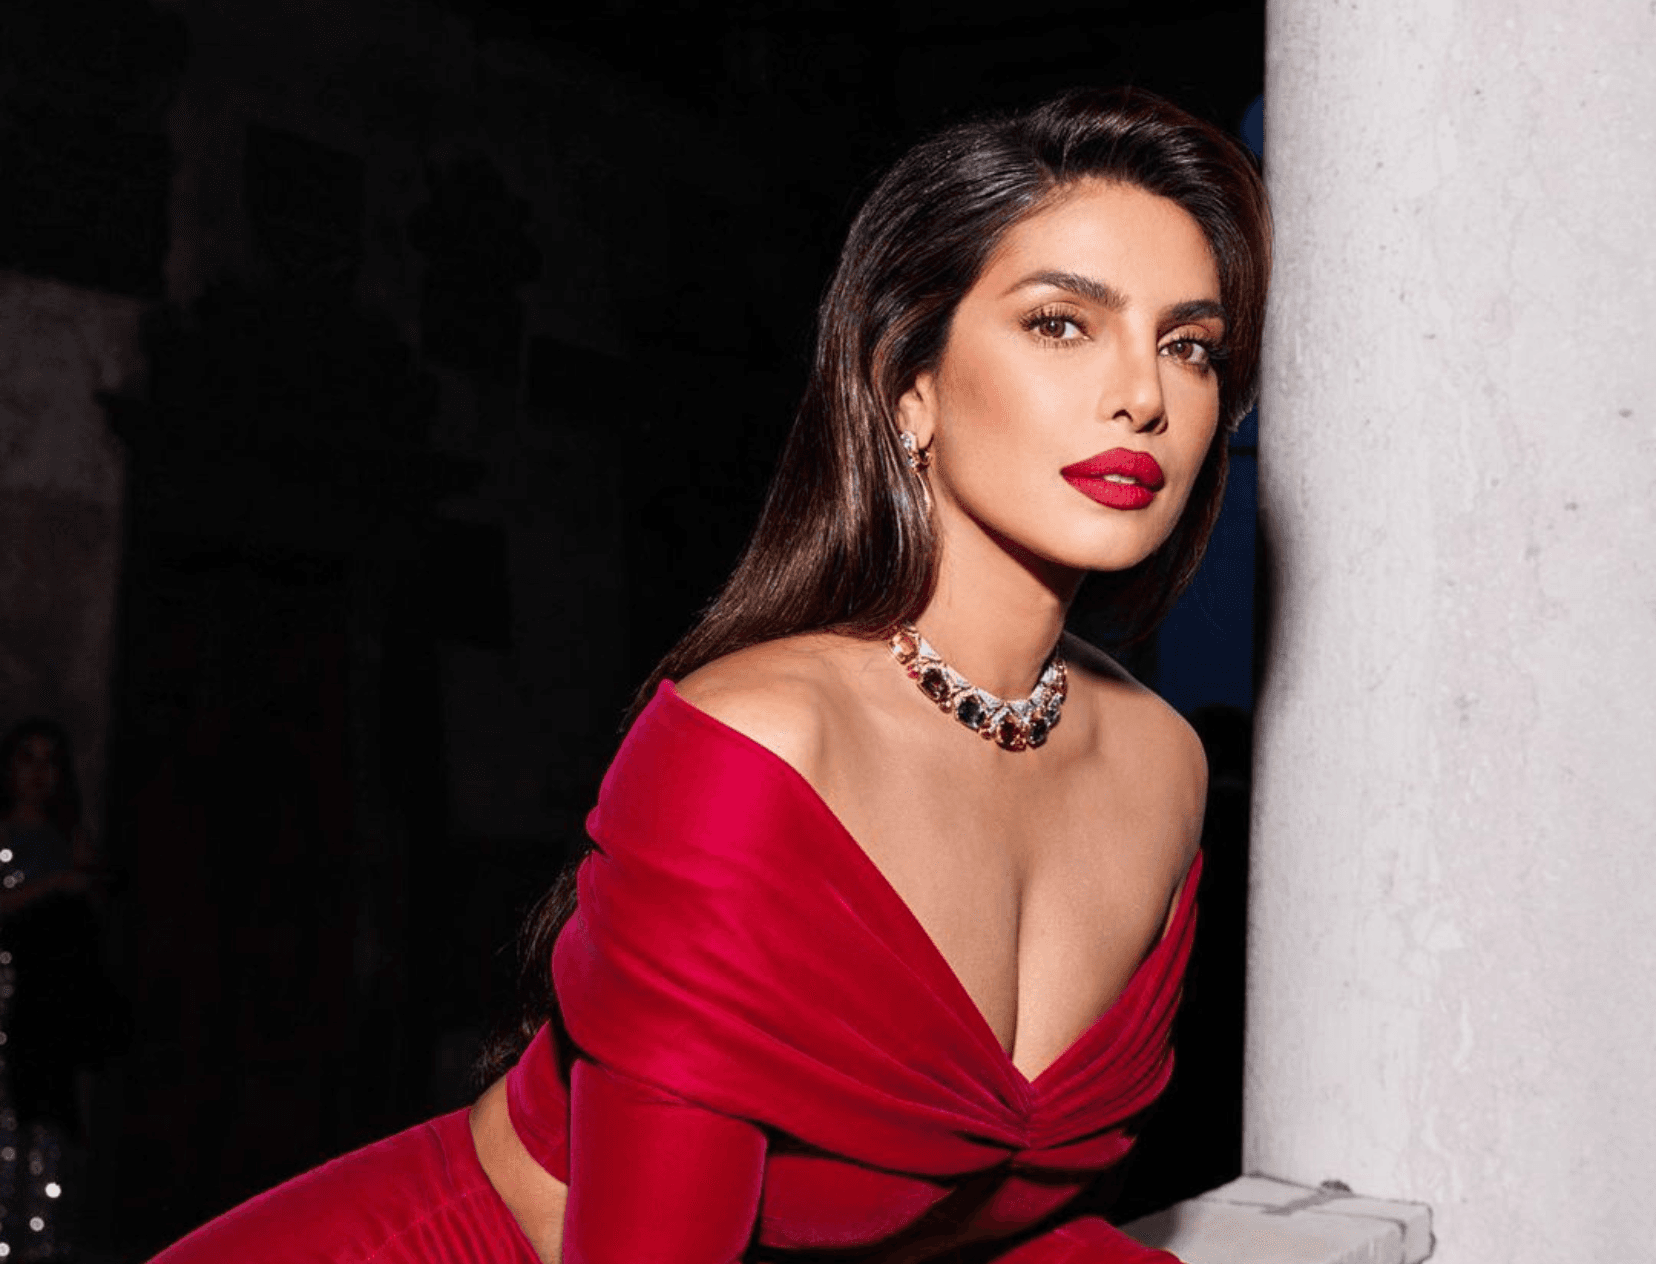 A Pakistani Actor Made The Most Outrageous Comments About Priyanka Chopra